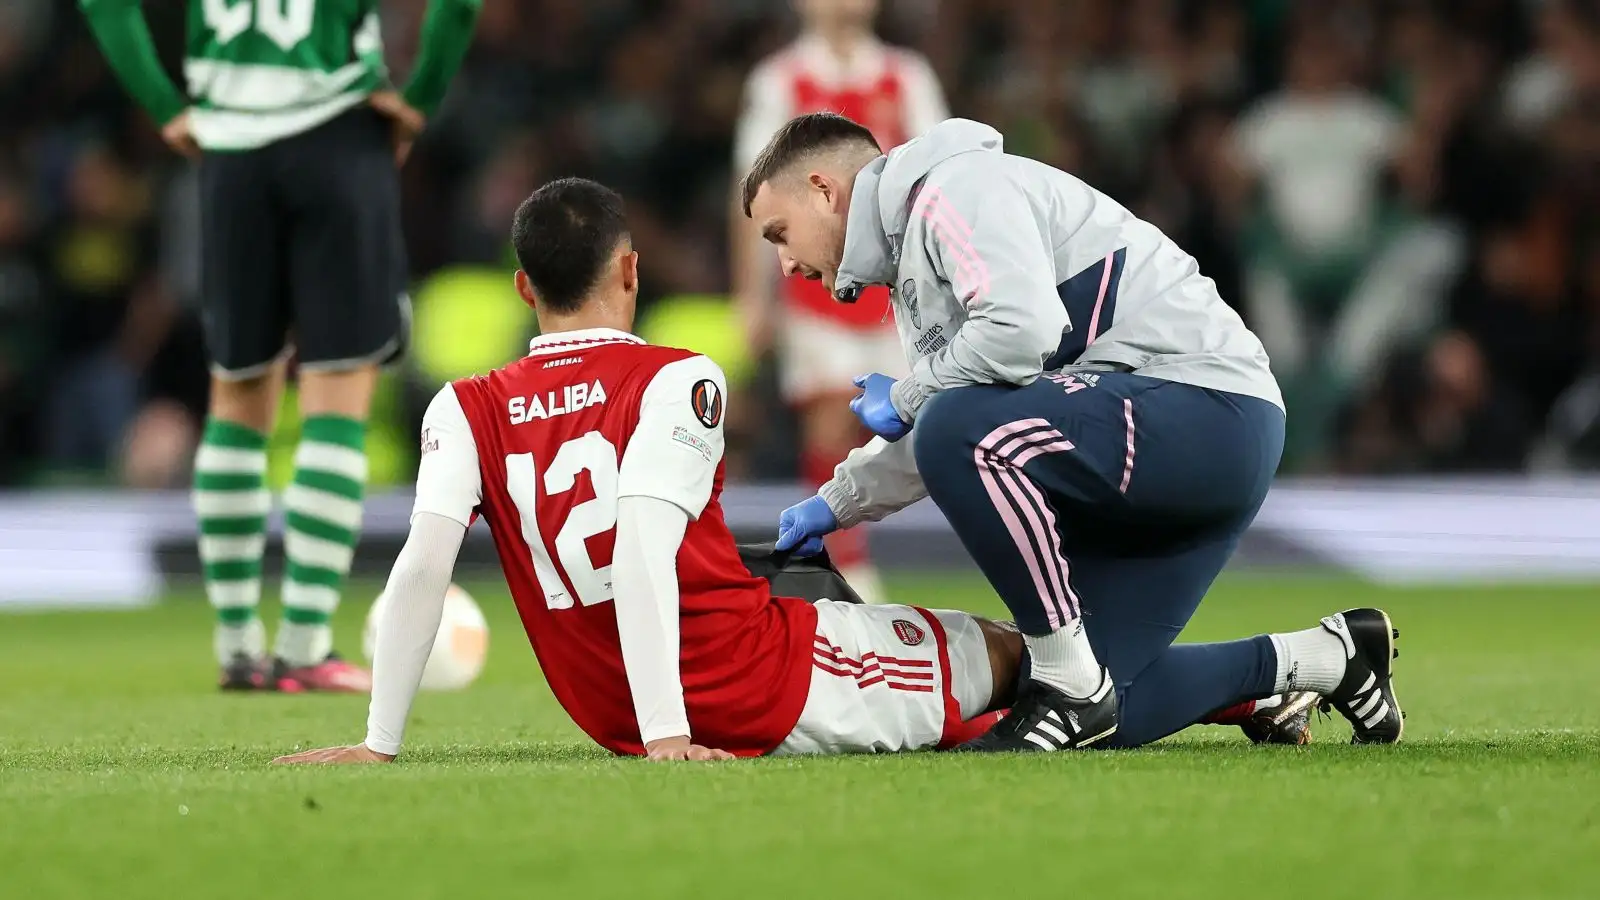 Arsenal defender William Saliba 'really happy' to be back after injury